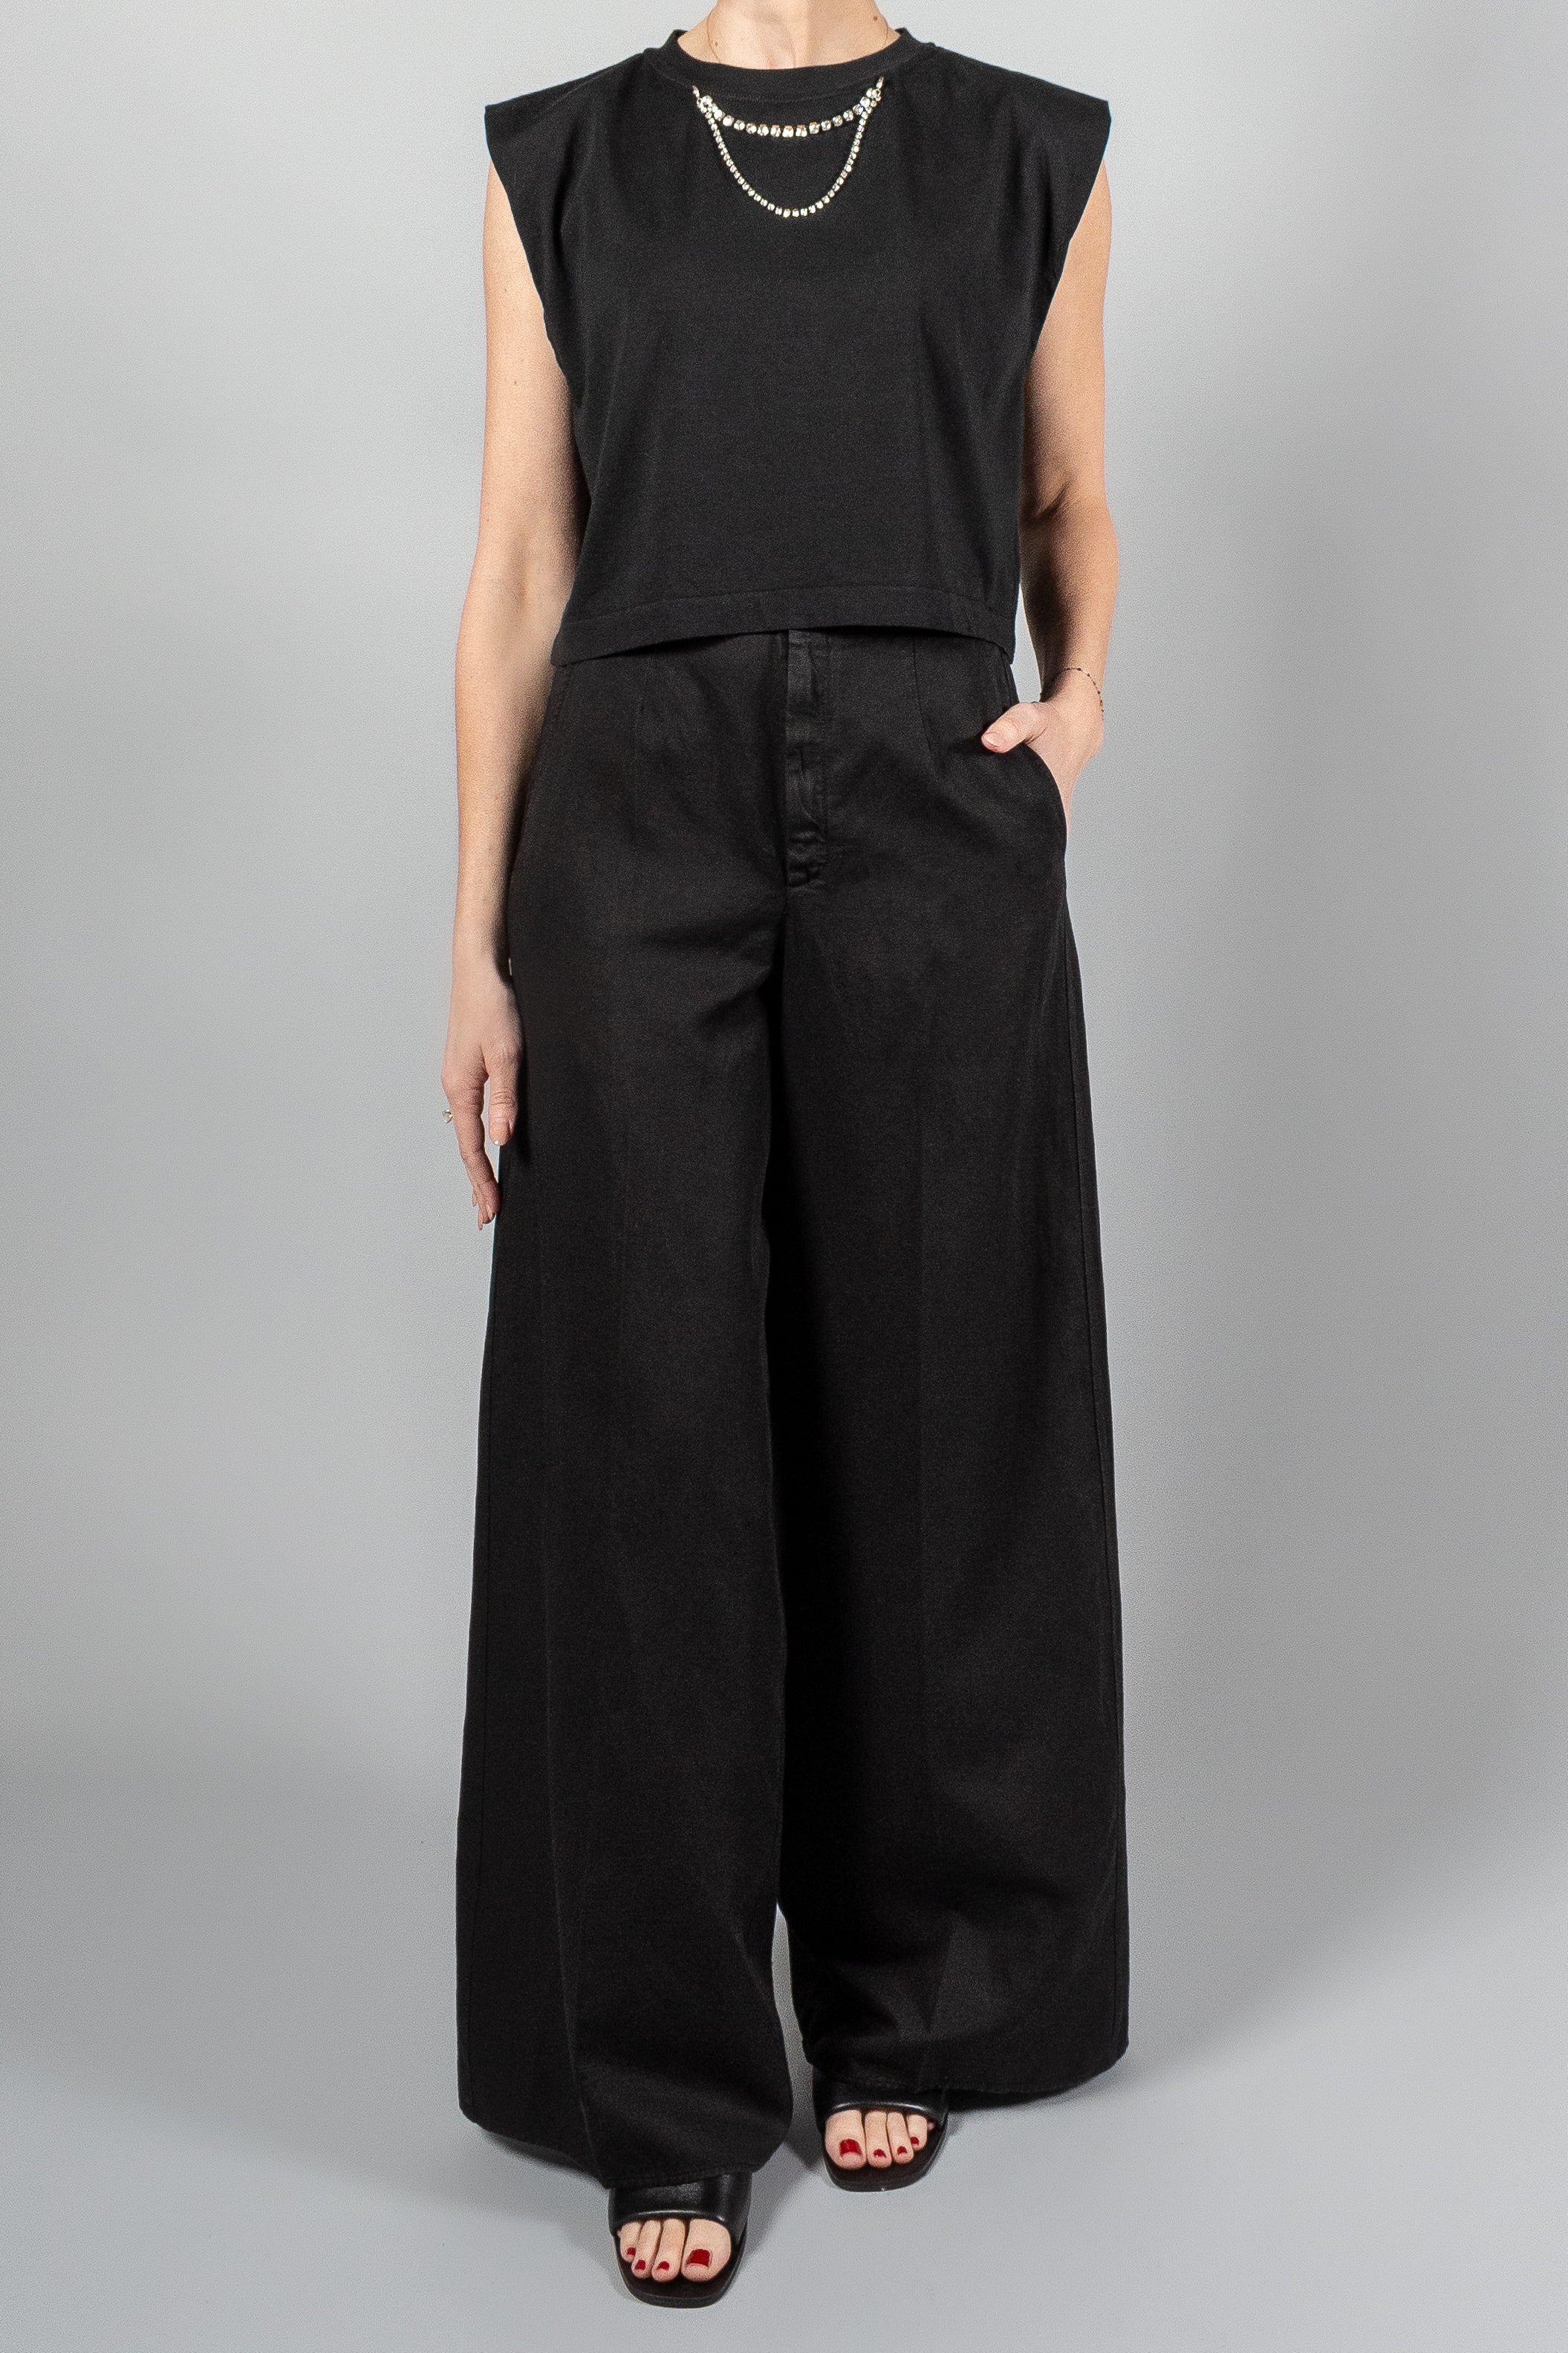 Forte Forte Chic Palazzo Pants-Pants and Shorts-Misch-Boutique-Vancouver-Canada-misch.ca